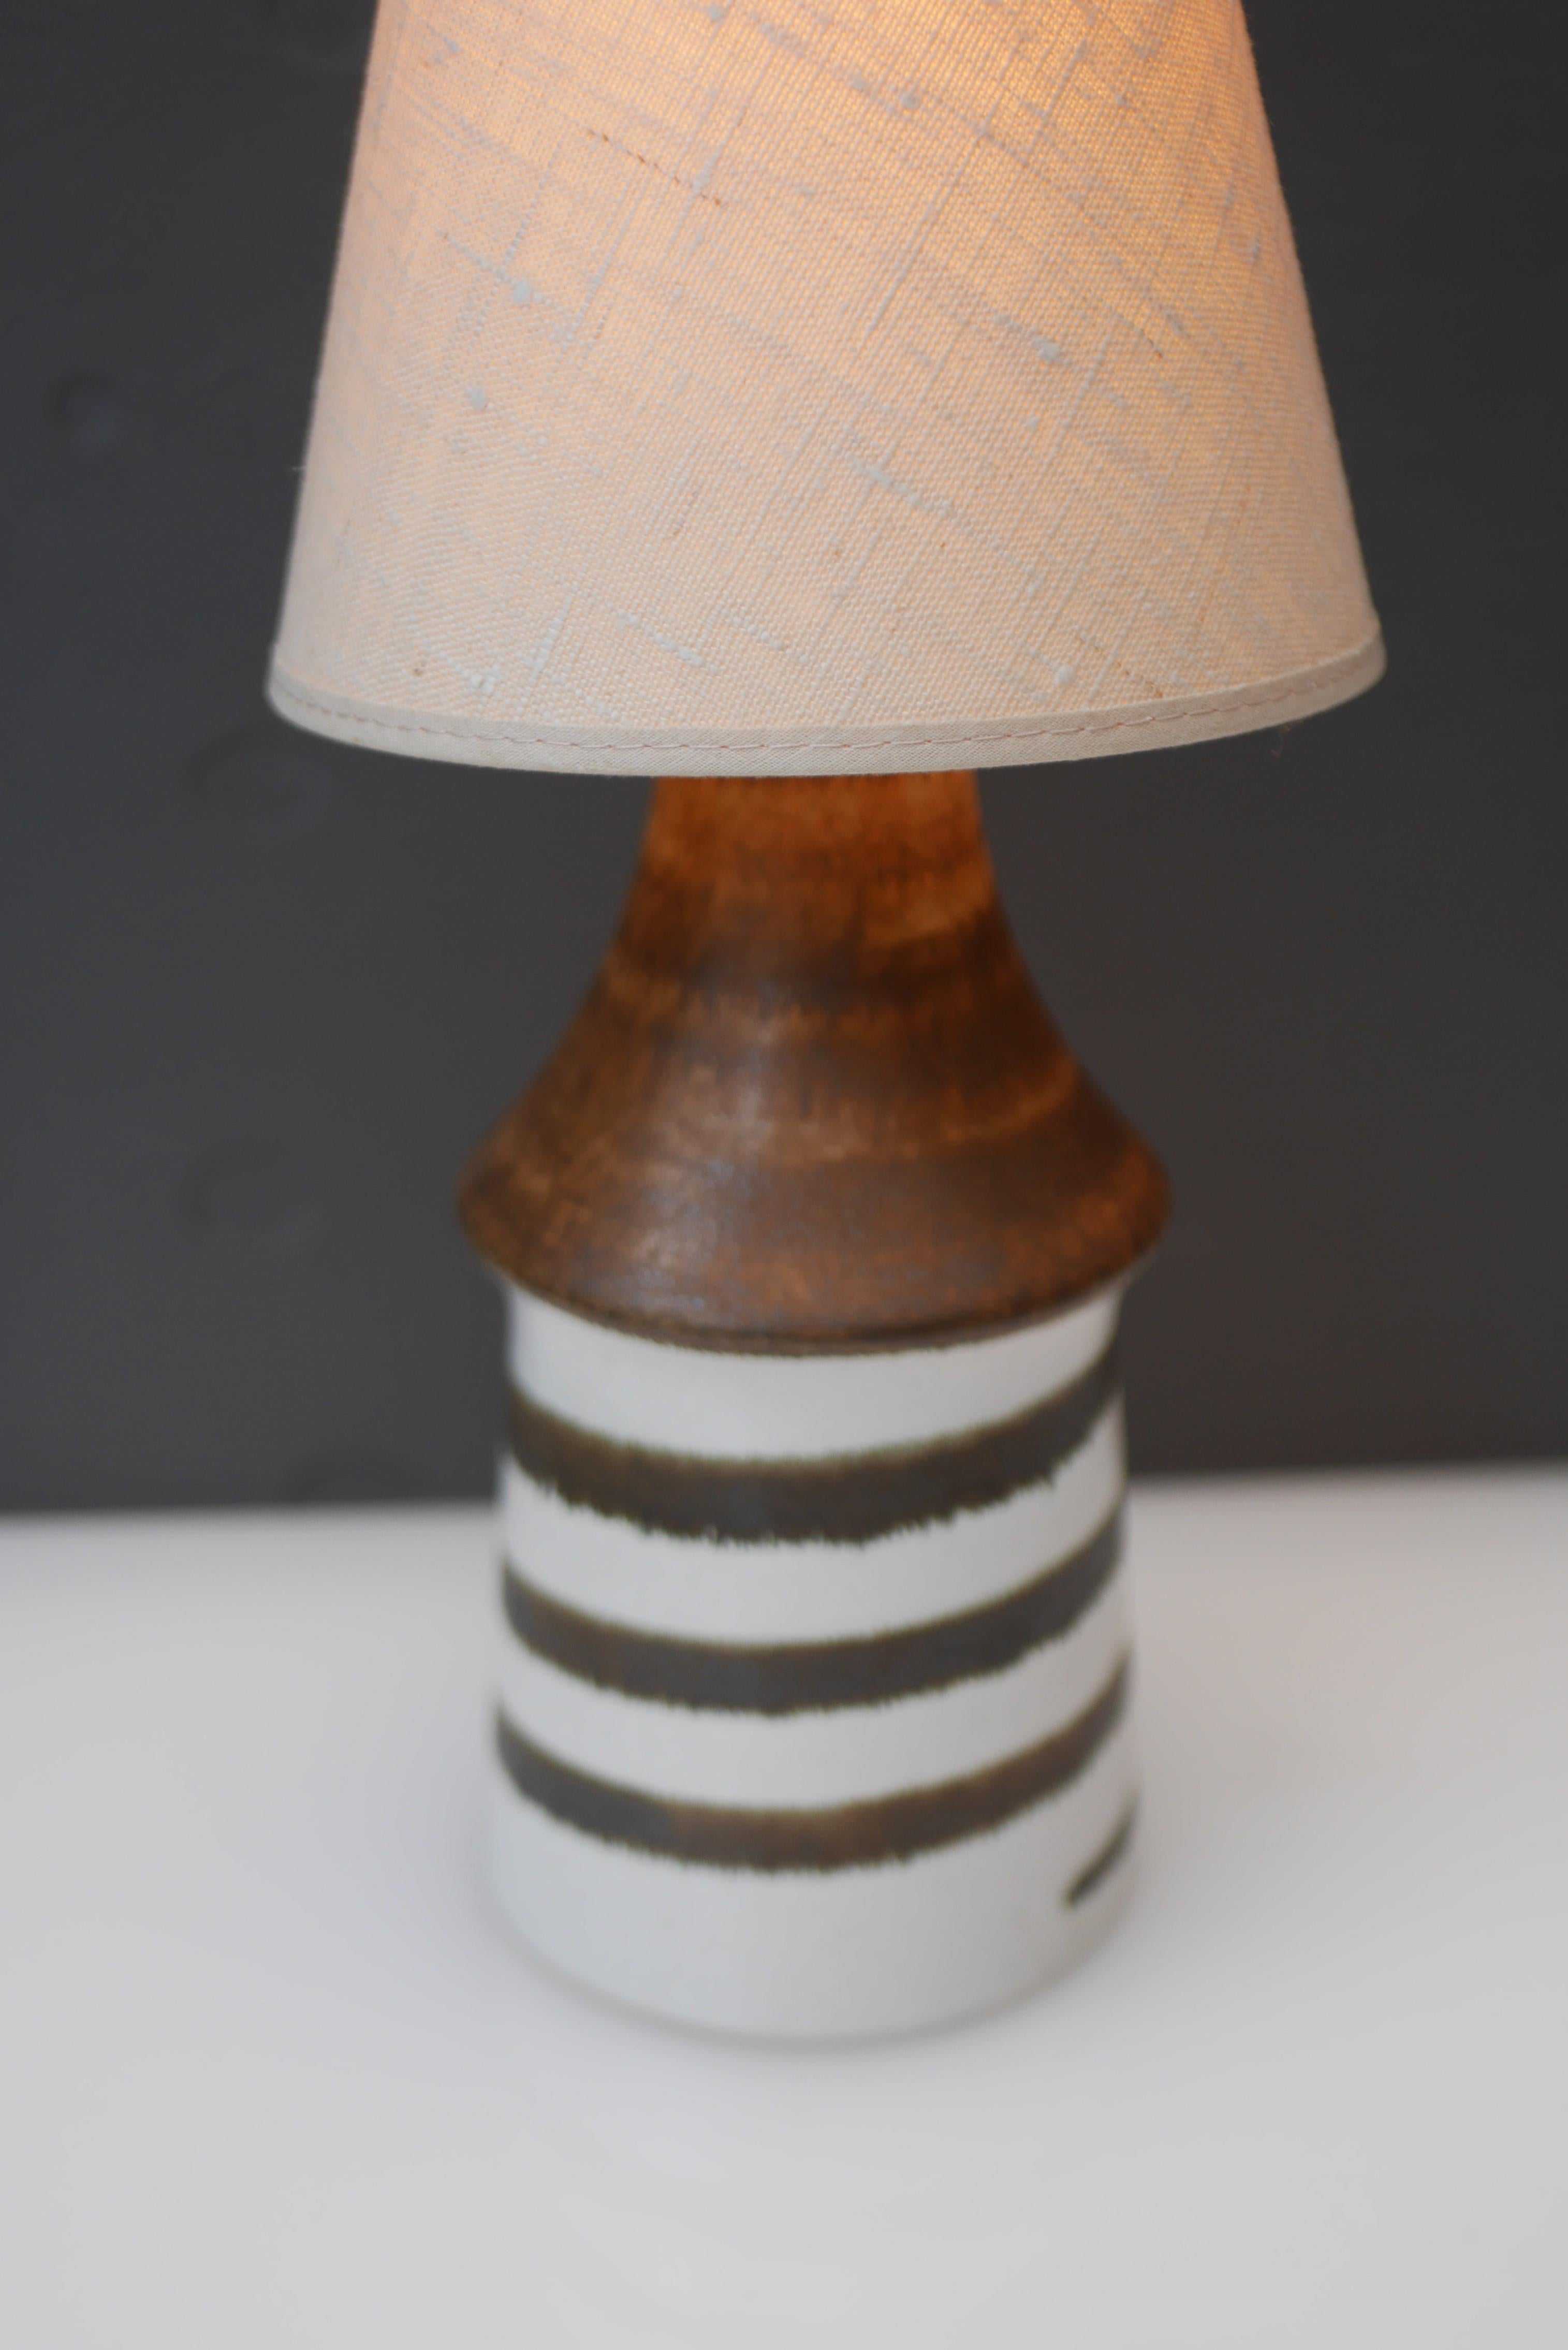 Ceramic Mid-century modern pottery table lamp by Bruno Karlsson, EGO, Sweden.  For Sale